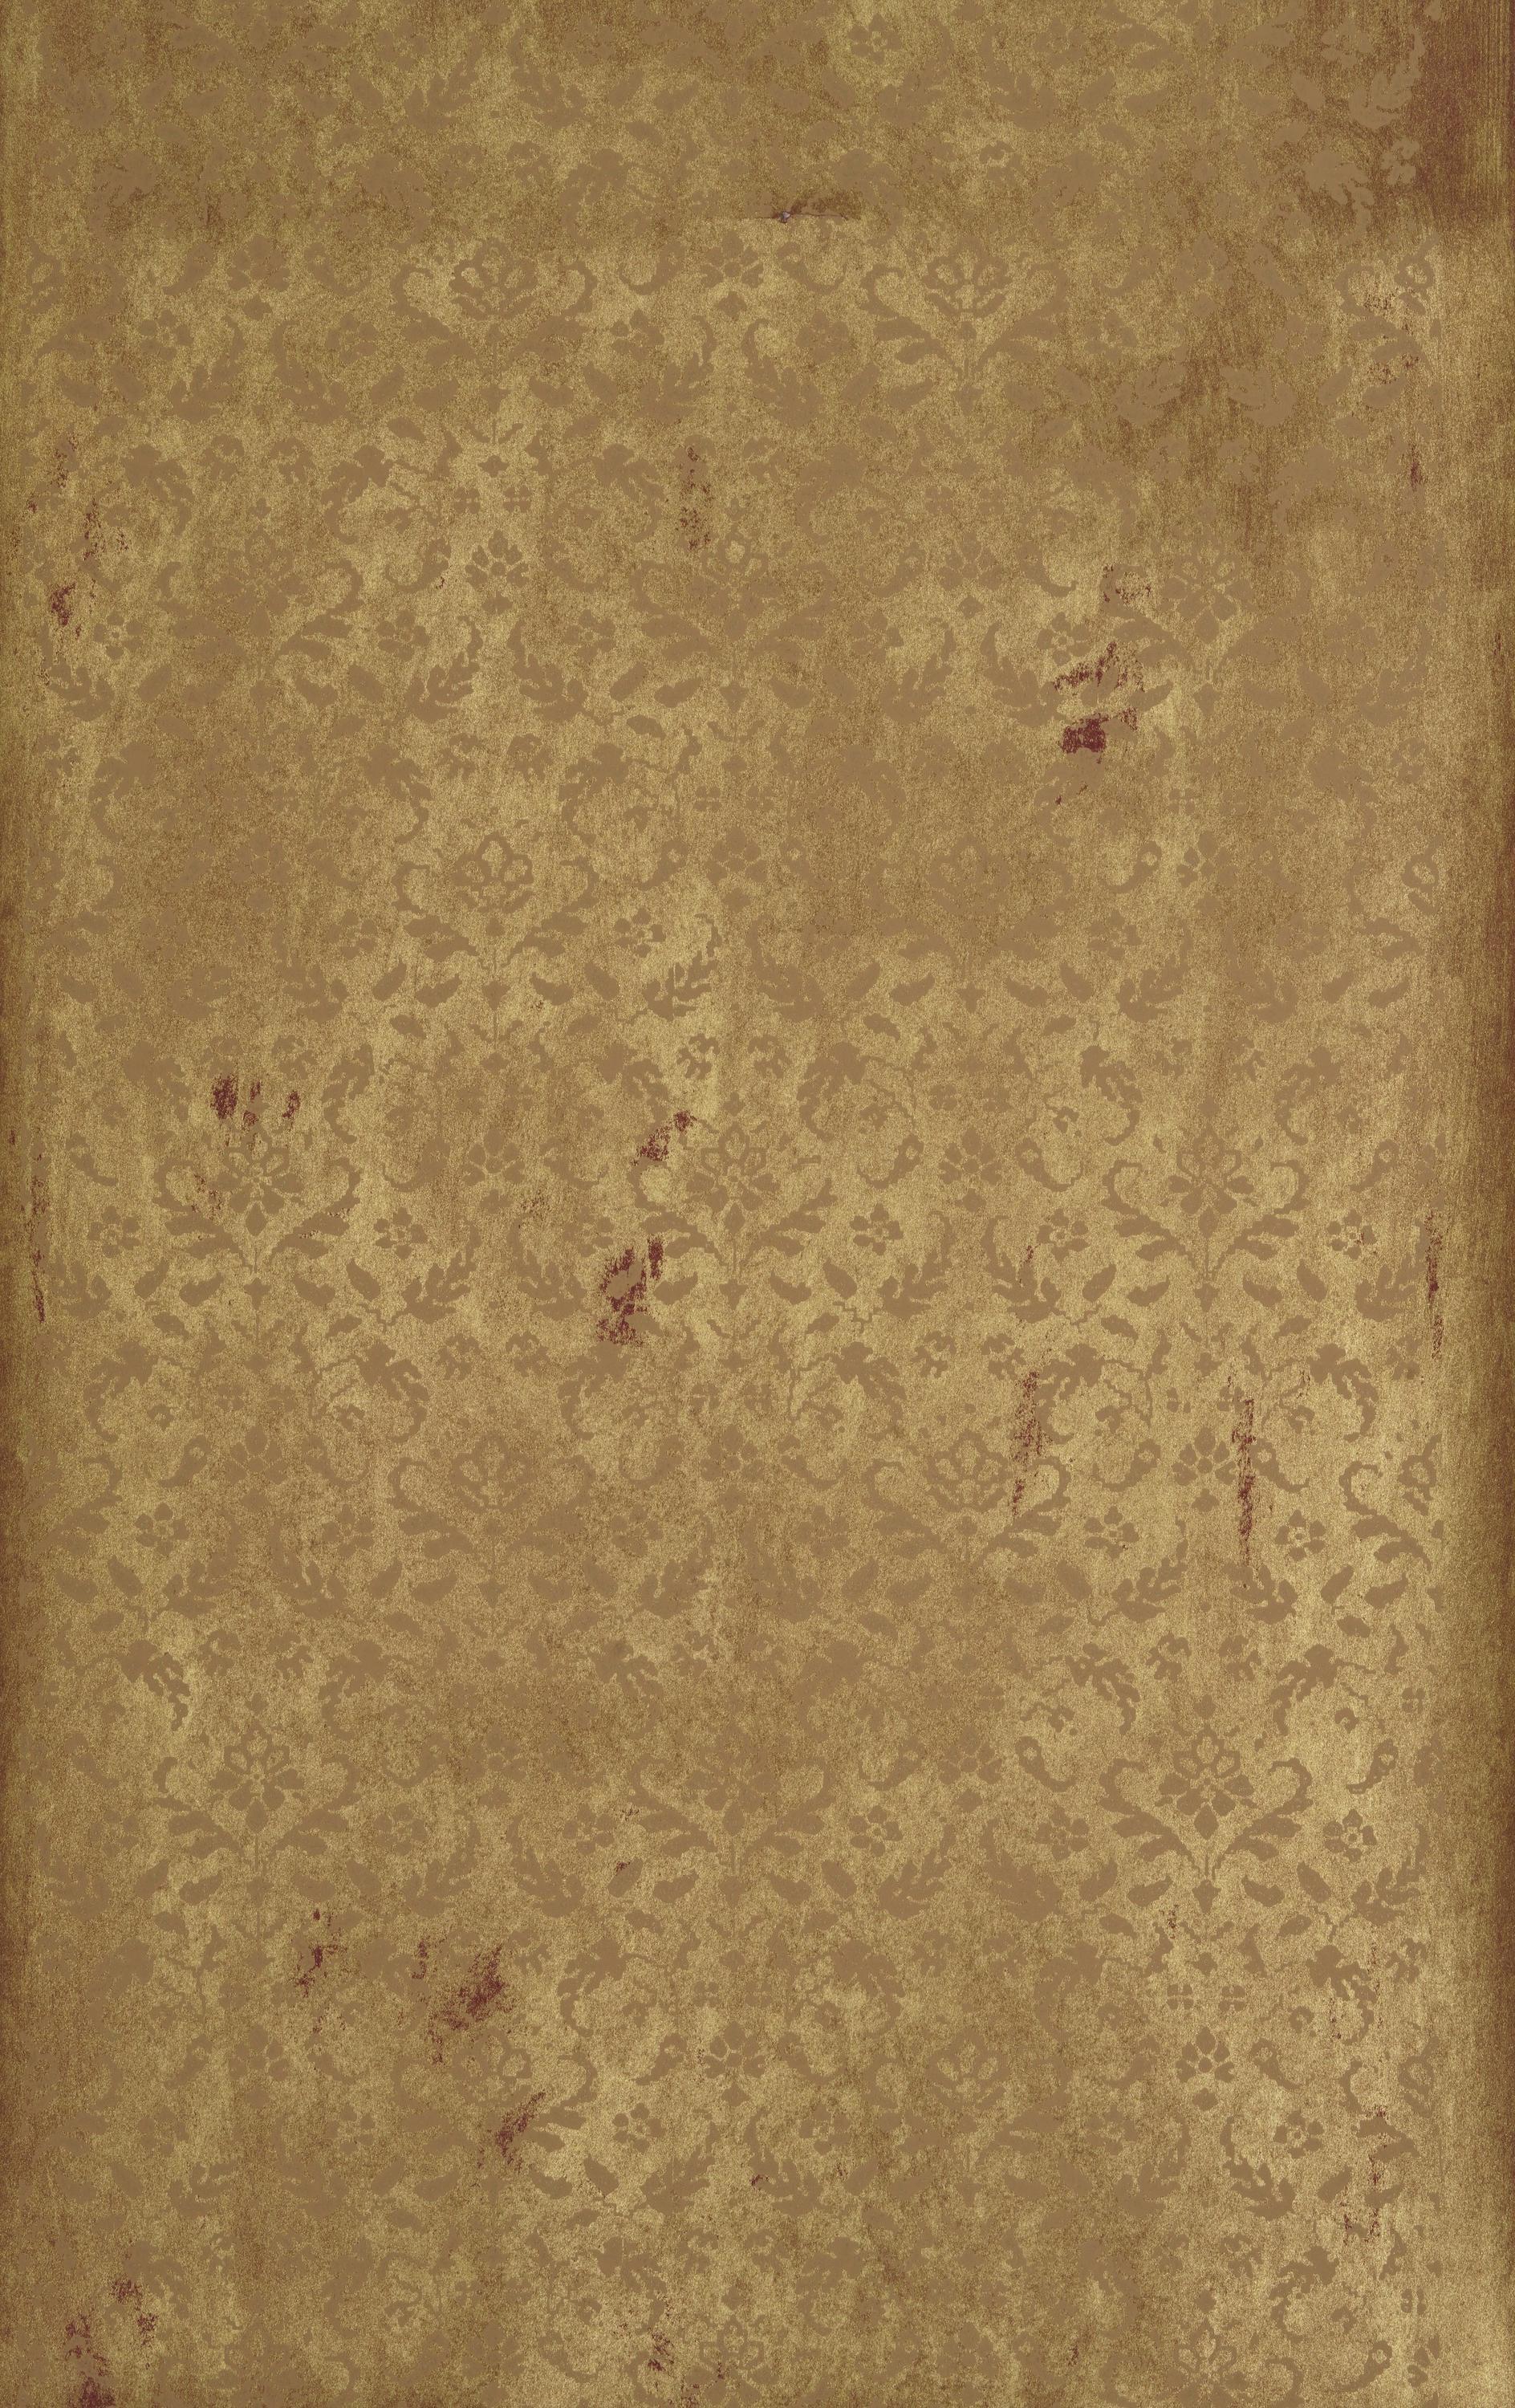 5 rolls of Gold on Bronze Zuber wallpaper

Zuber & Cie
Rizheim, France; printed ca. 2006
Iridescent silk collection (Zuber reference no. 40019)

Approximate size: 393 x 18.5 inches per roll

5 rolls of Gold on Bronze Zuber & Cie wallpaper from their